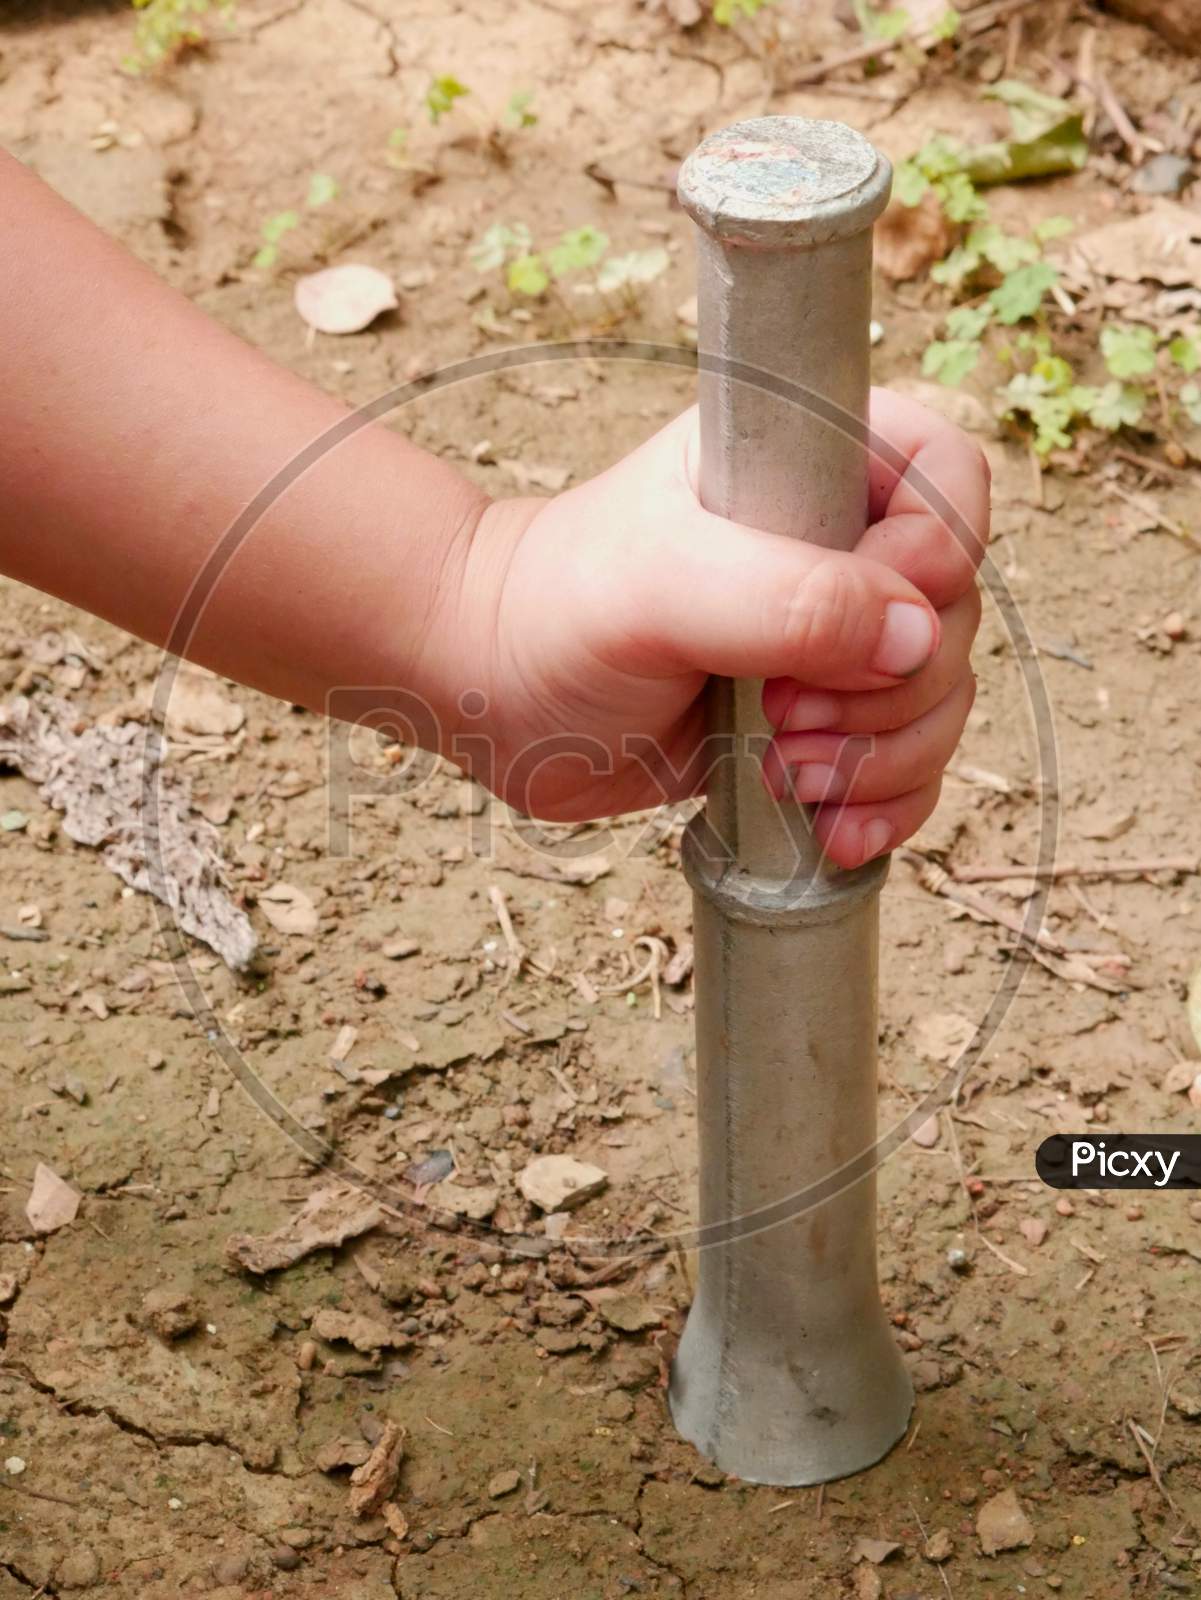 Kid Hand Holding Iron Construction Tools While Hitting Soil Land.